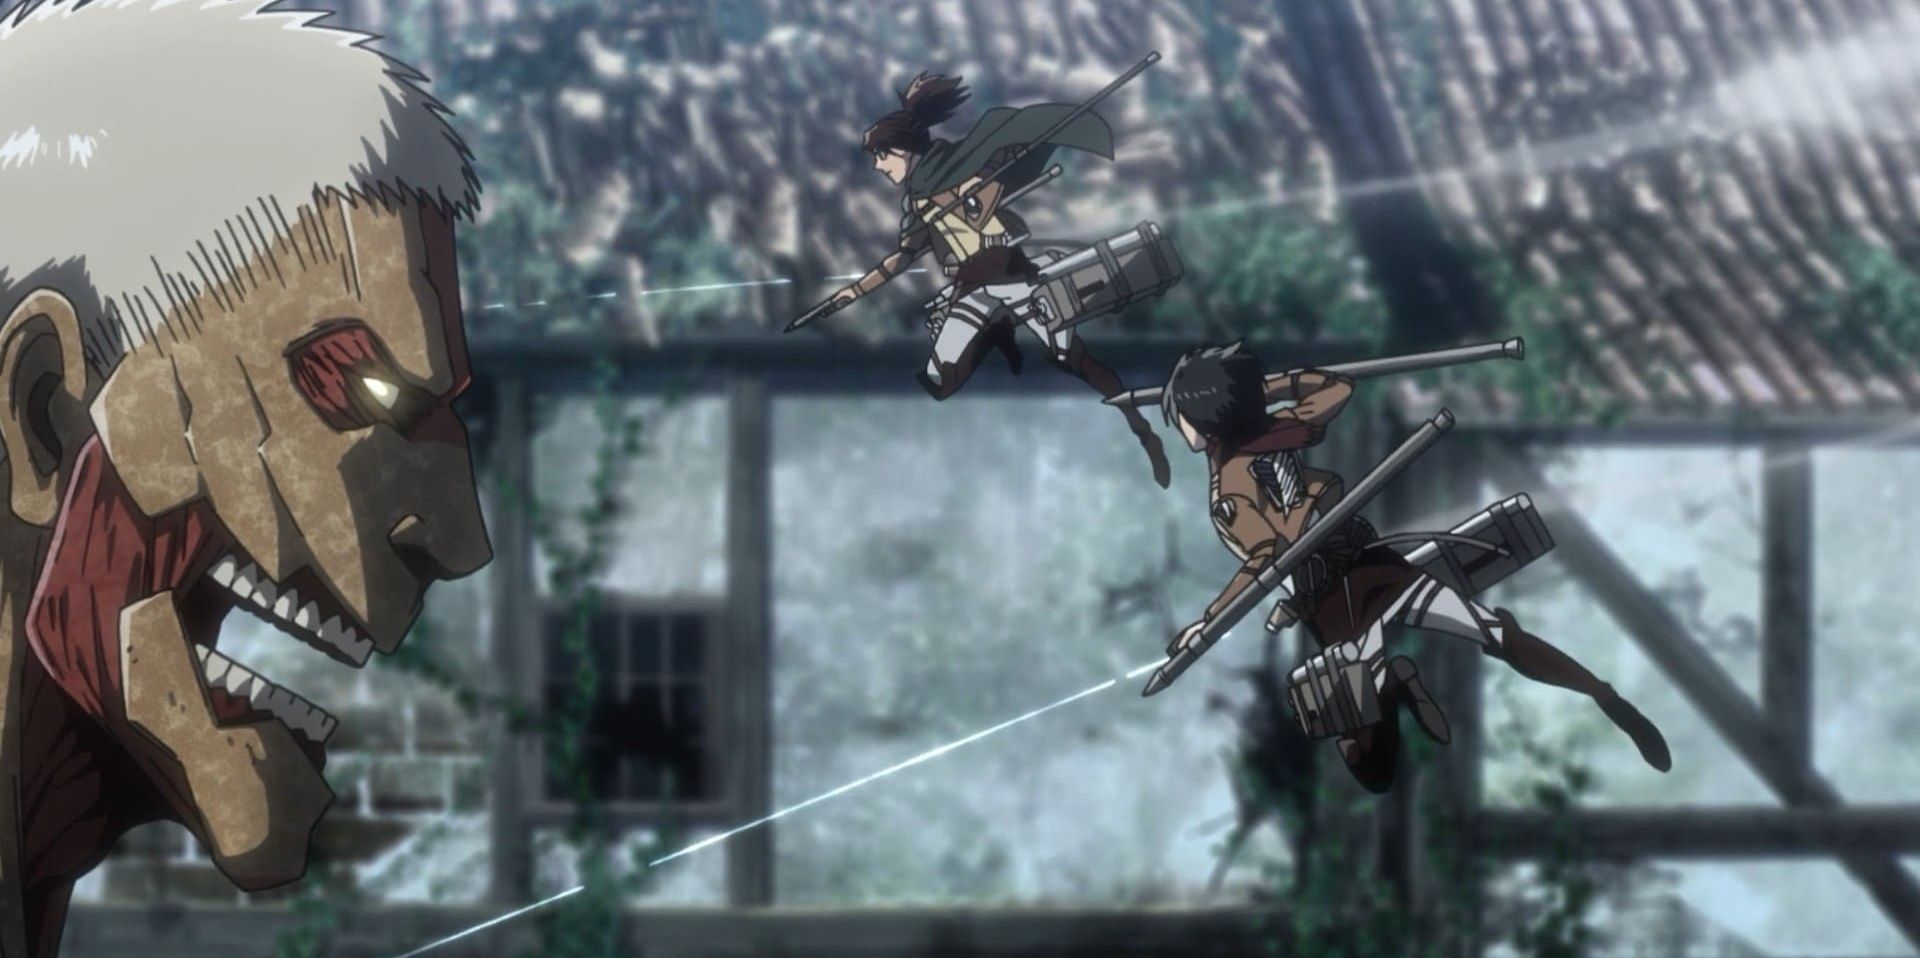 The Survey Corps versus The Colossal, Armored, and Beast Titan during the Return to Shiganshina arc in Attack On Titan